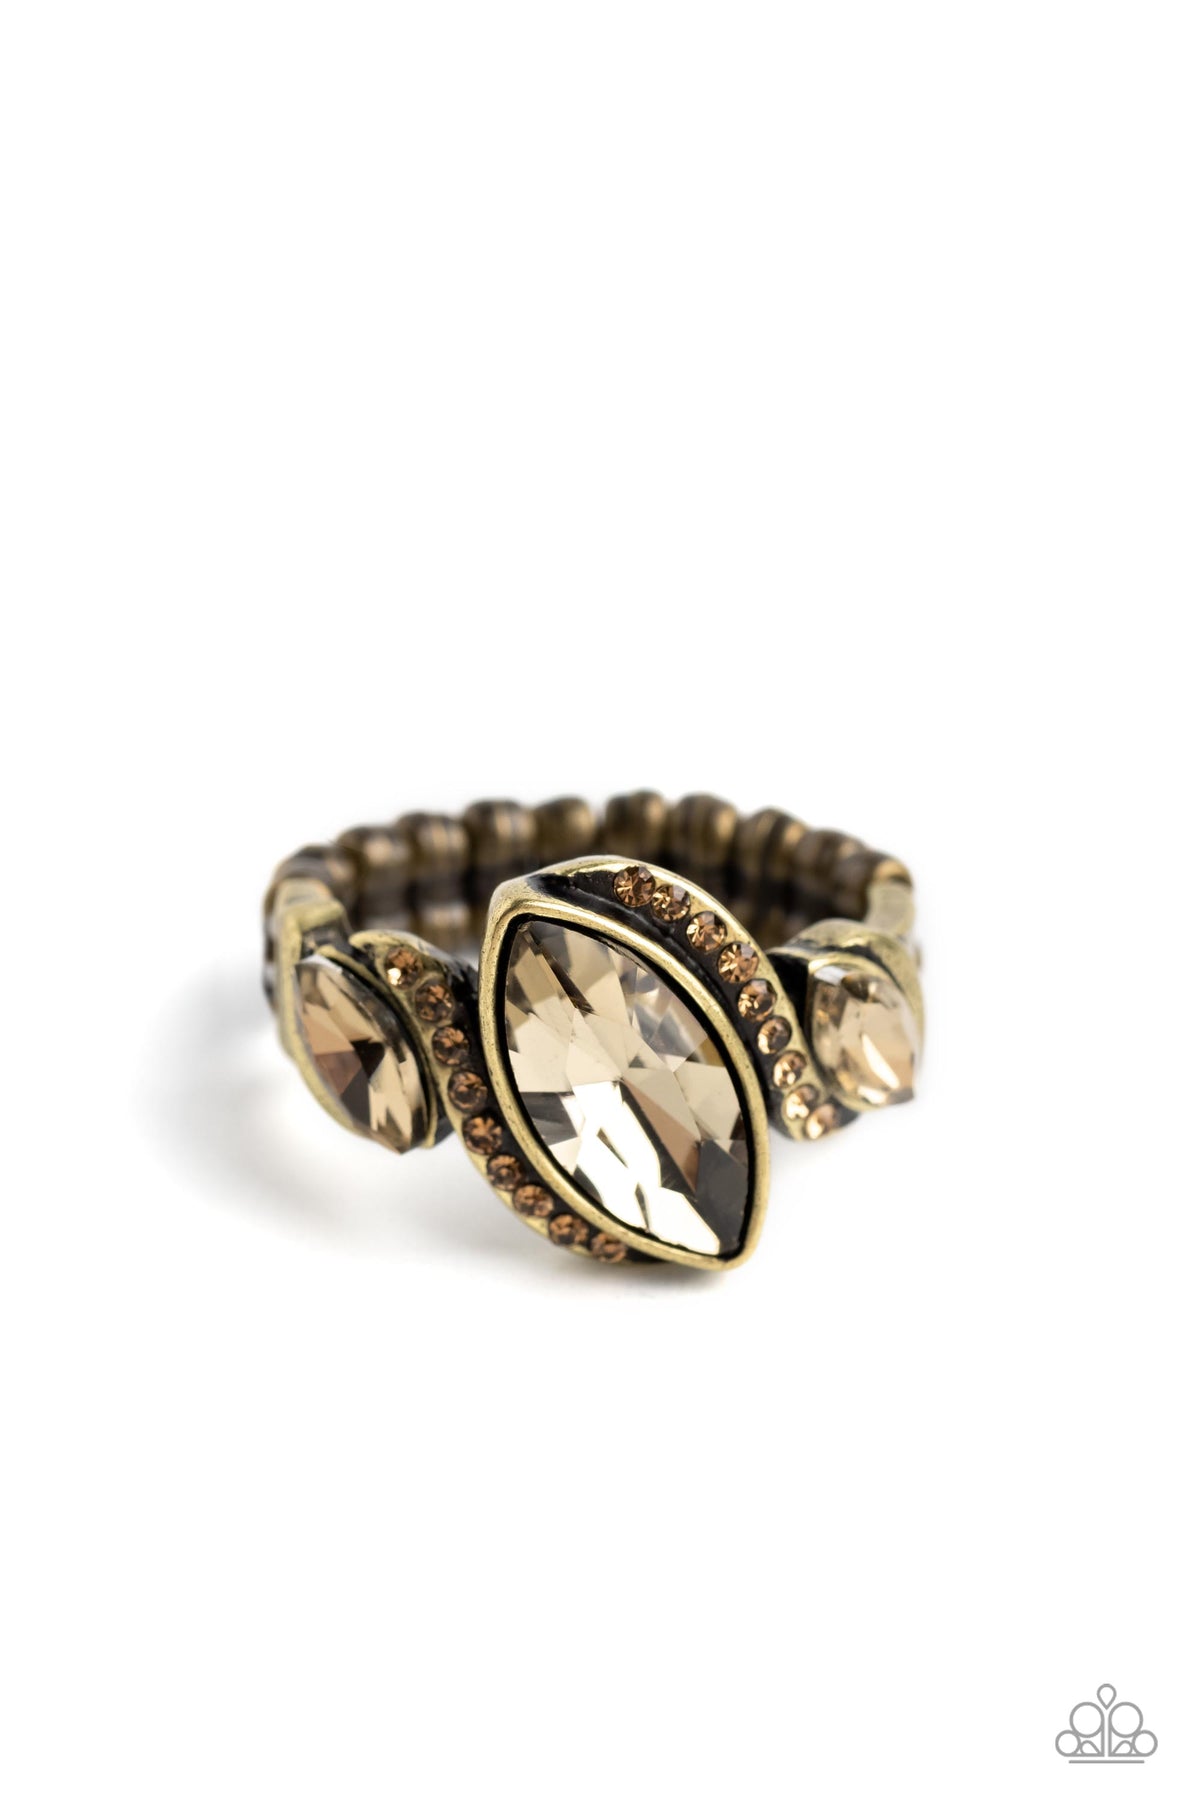 Tilted Triplets Brass Rhinestone Ring - Paparazzi Accessories- lightbox - CarasShop.com - $5 Jewelry by Cara Jewels